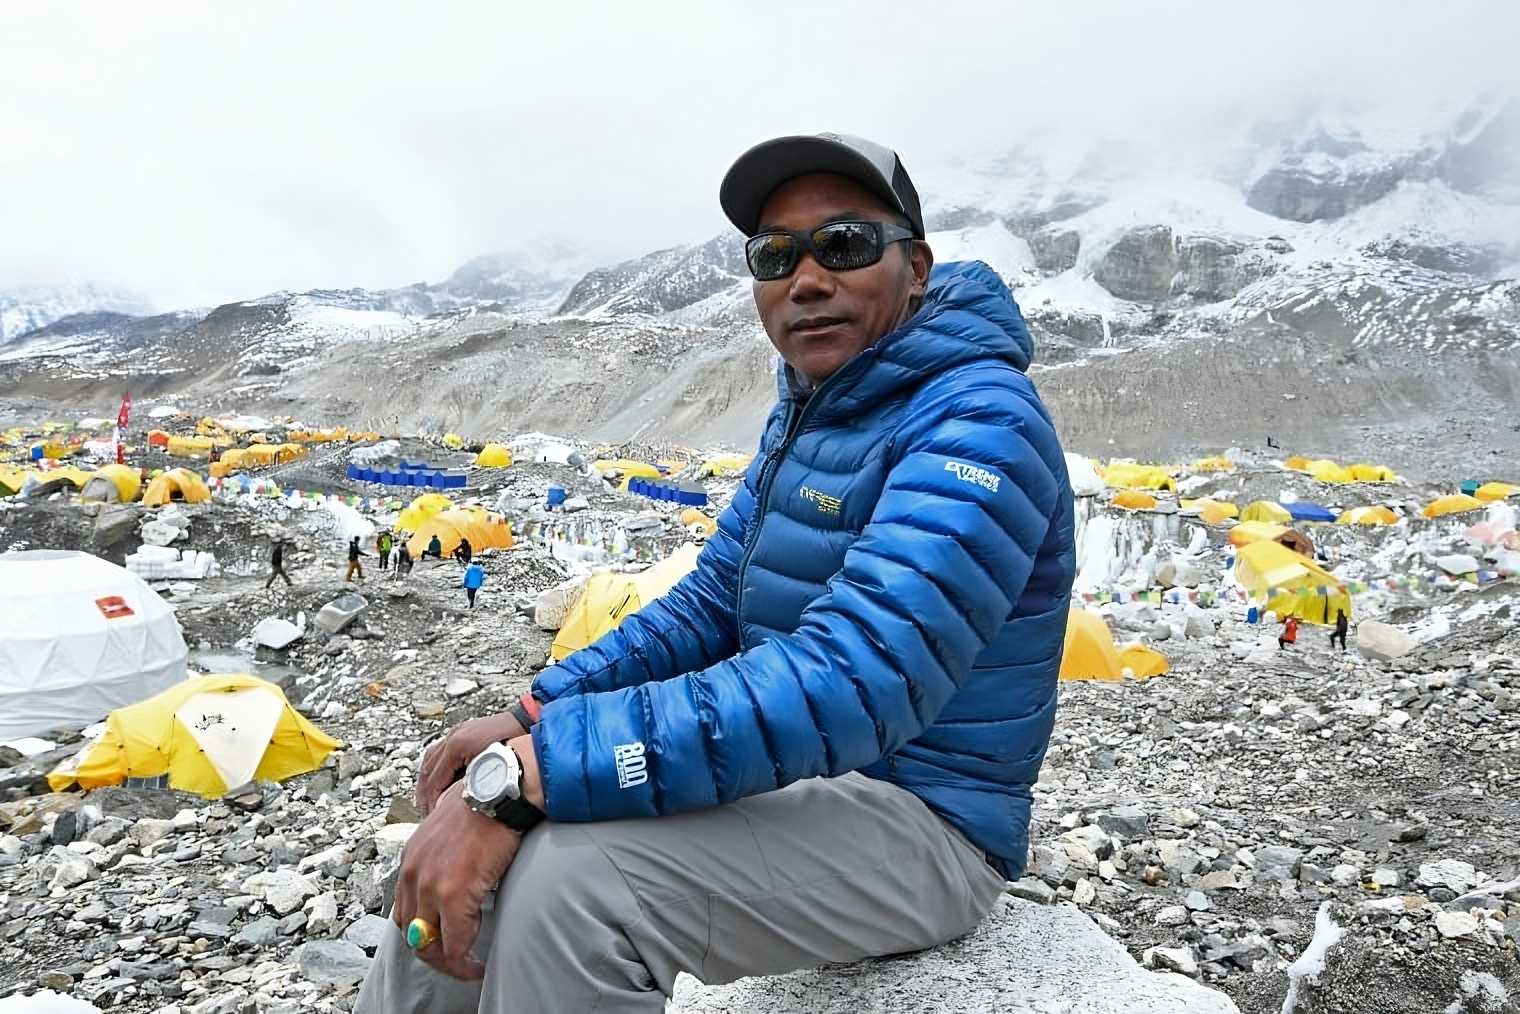 Sherpa Kami Rita holds the record for climbing Mount Everest 28 times.